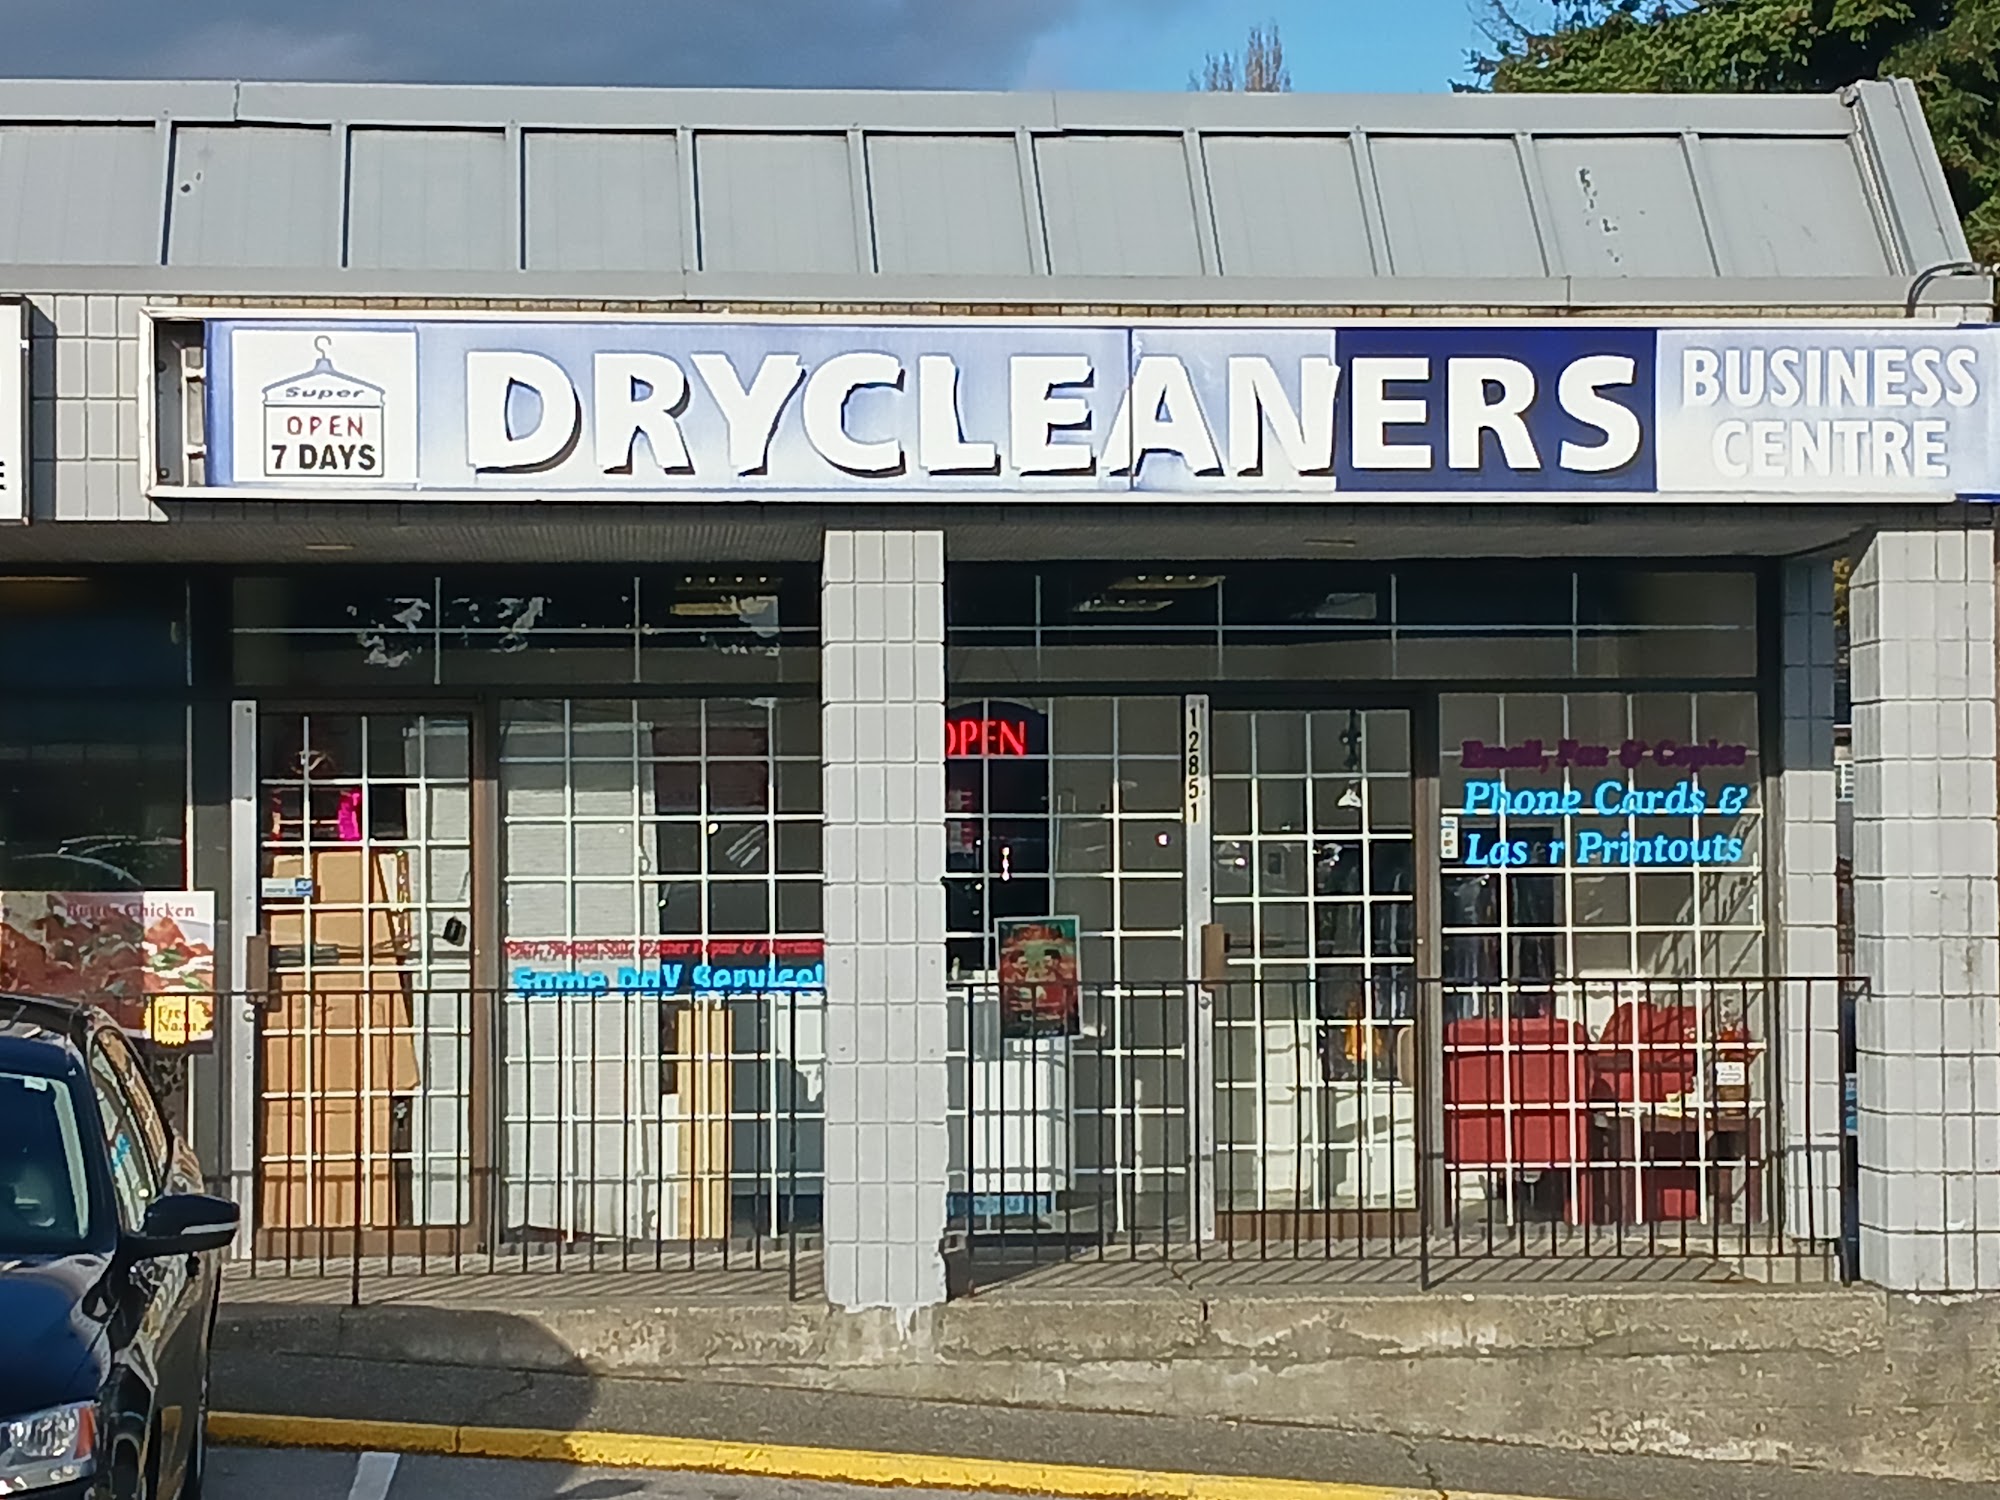 Super Drycleaners & Business Centre